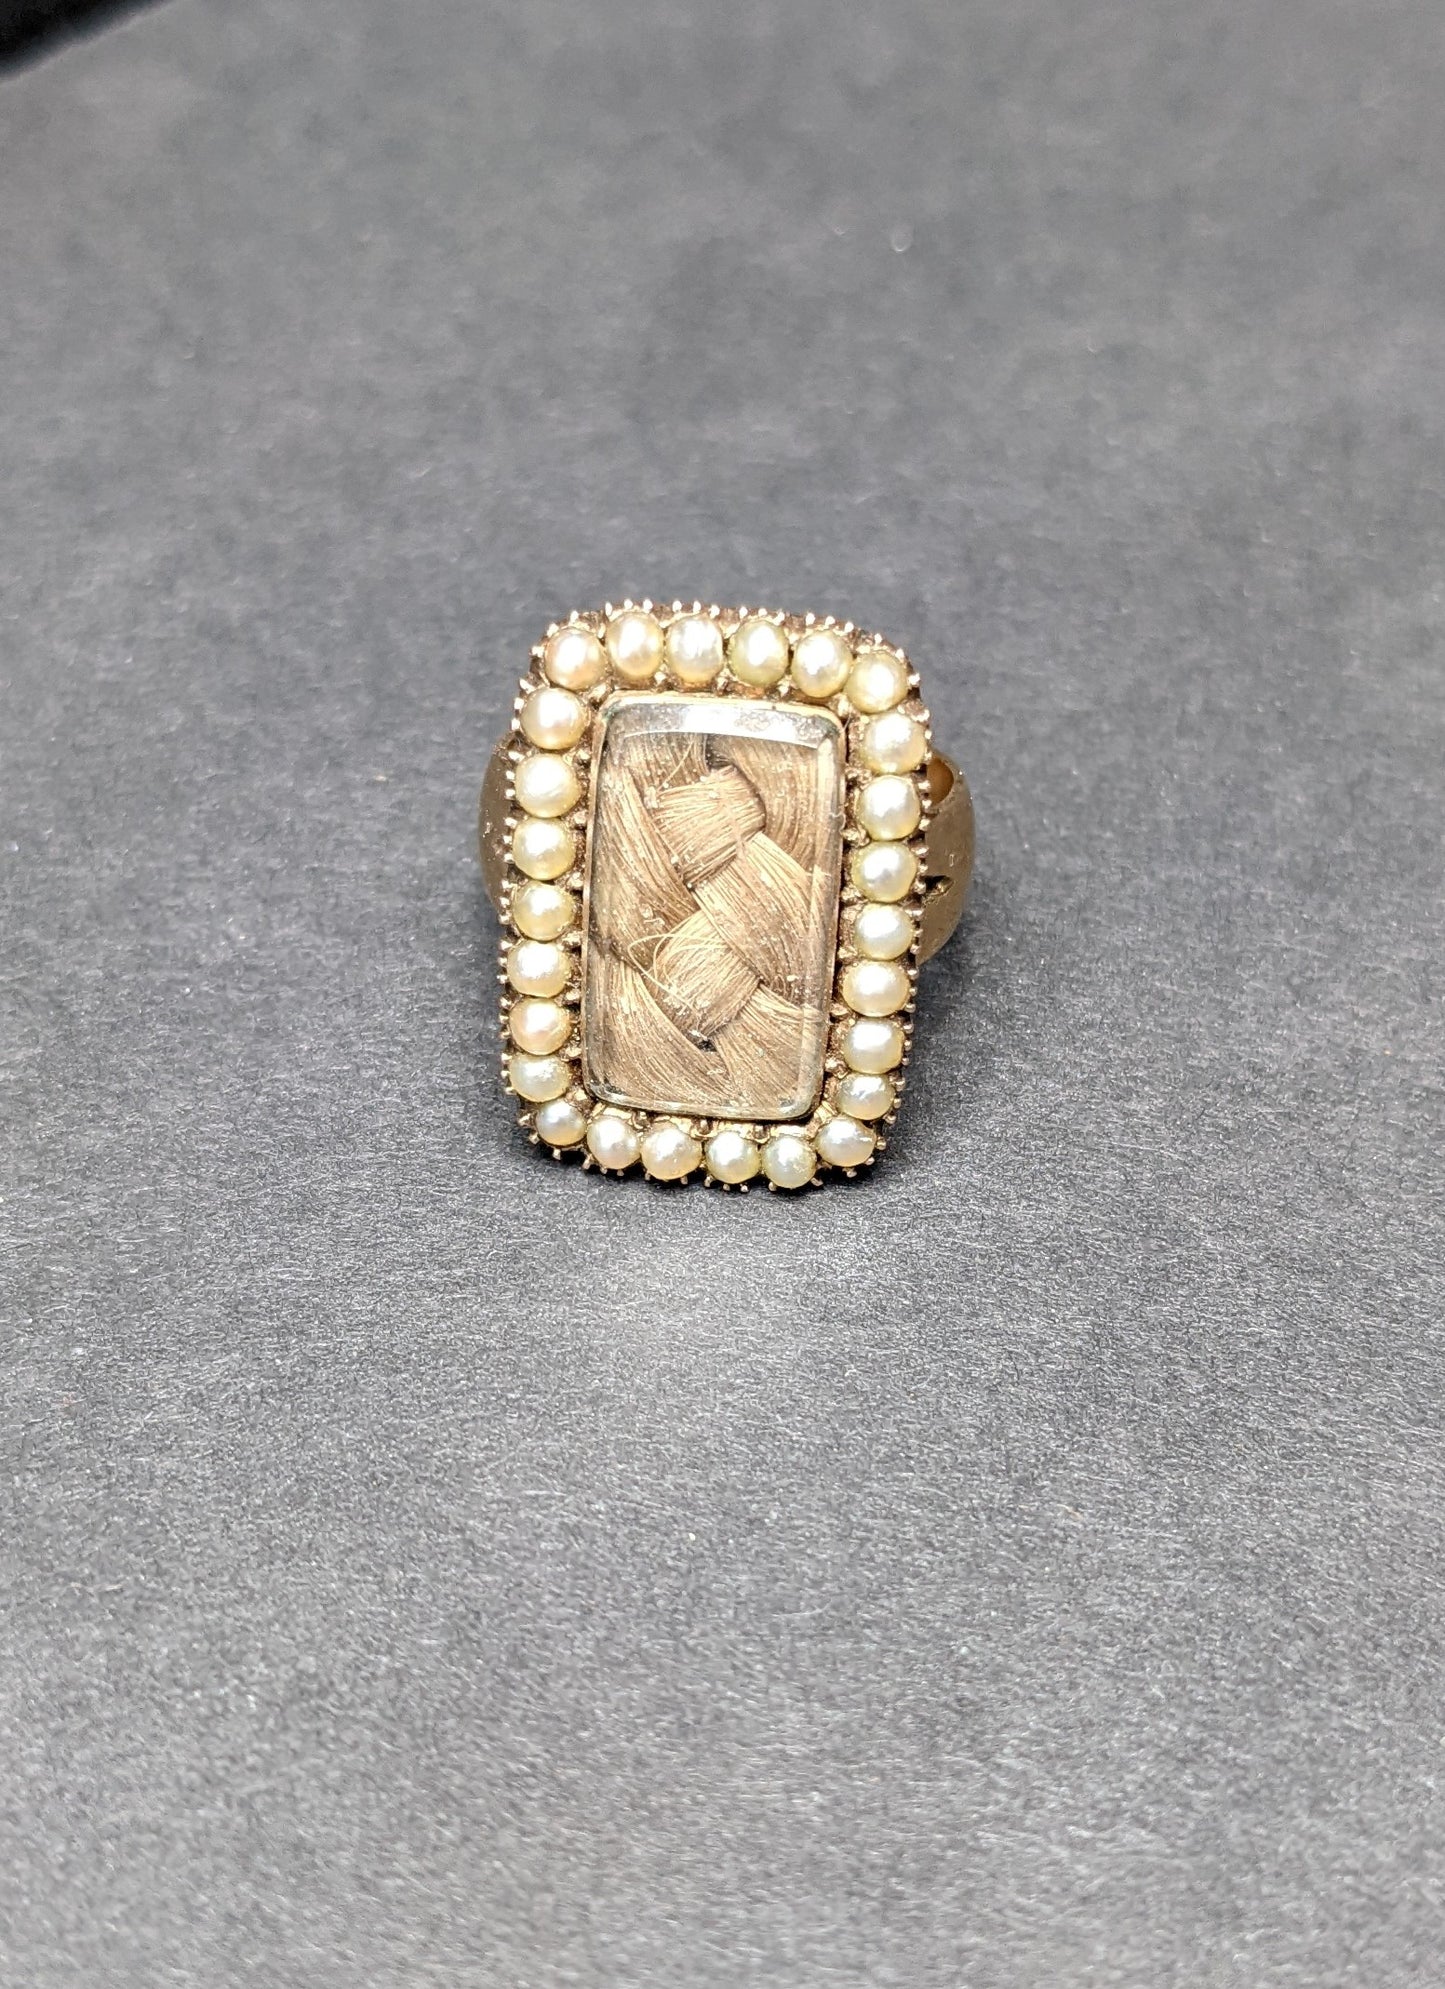 9k English Sentimental ring with woven hair and half pearls 1866